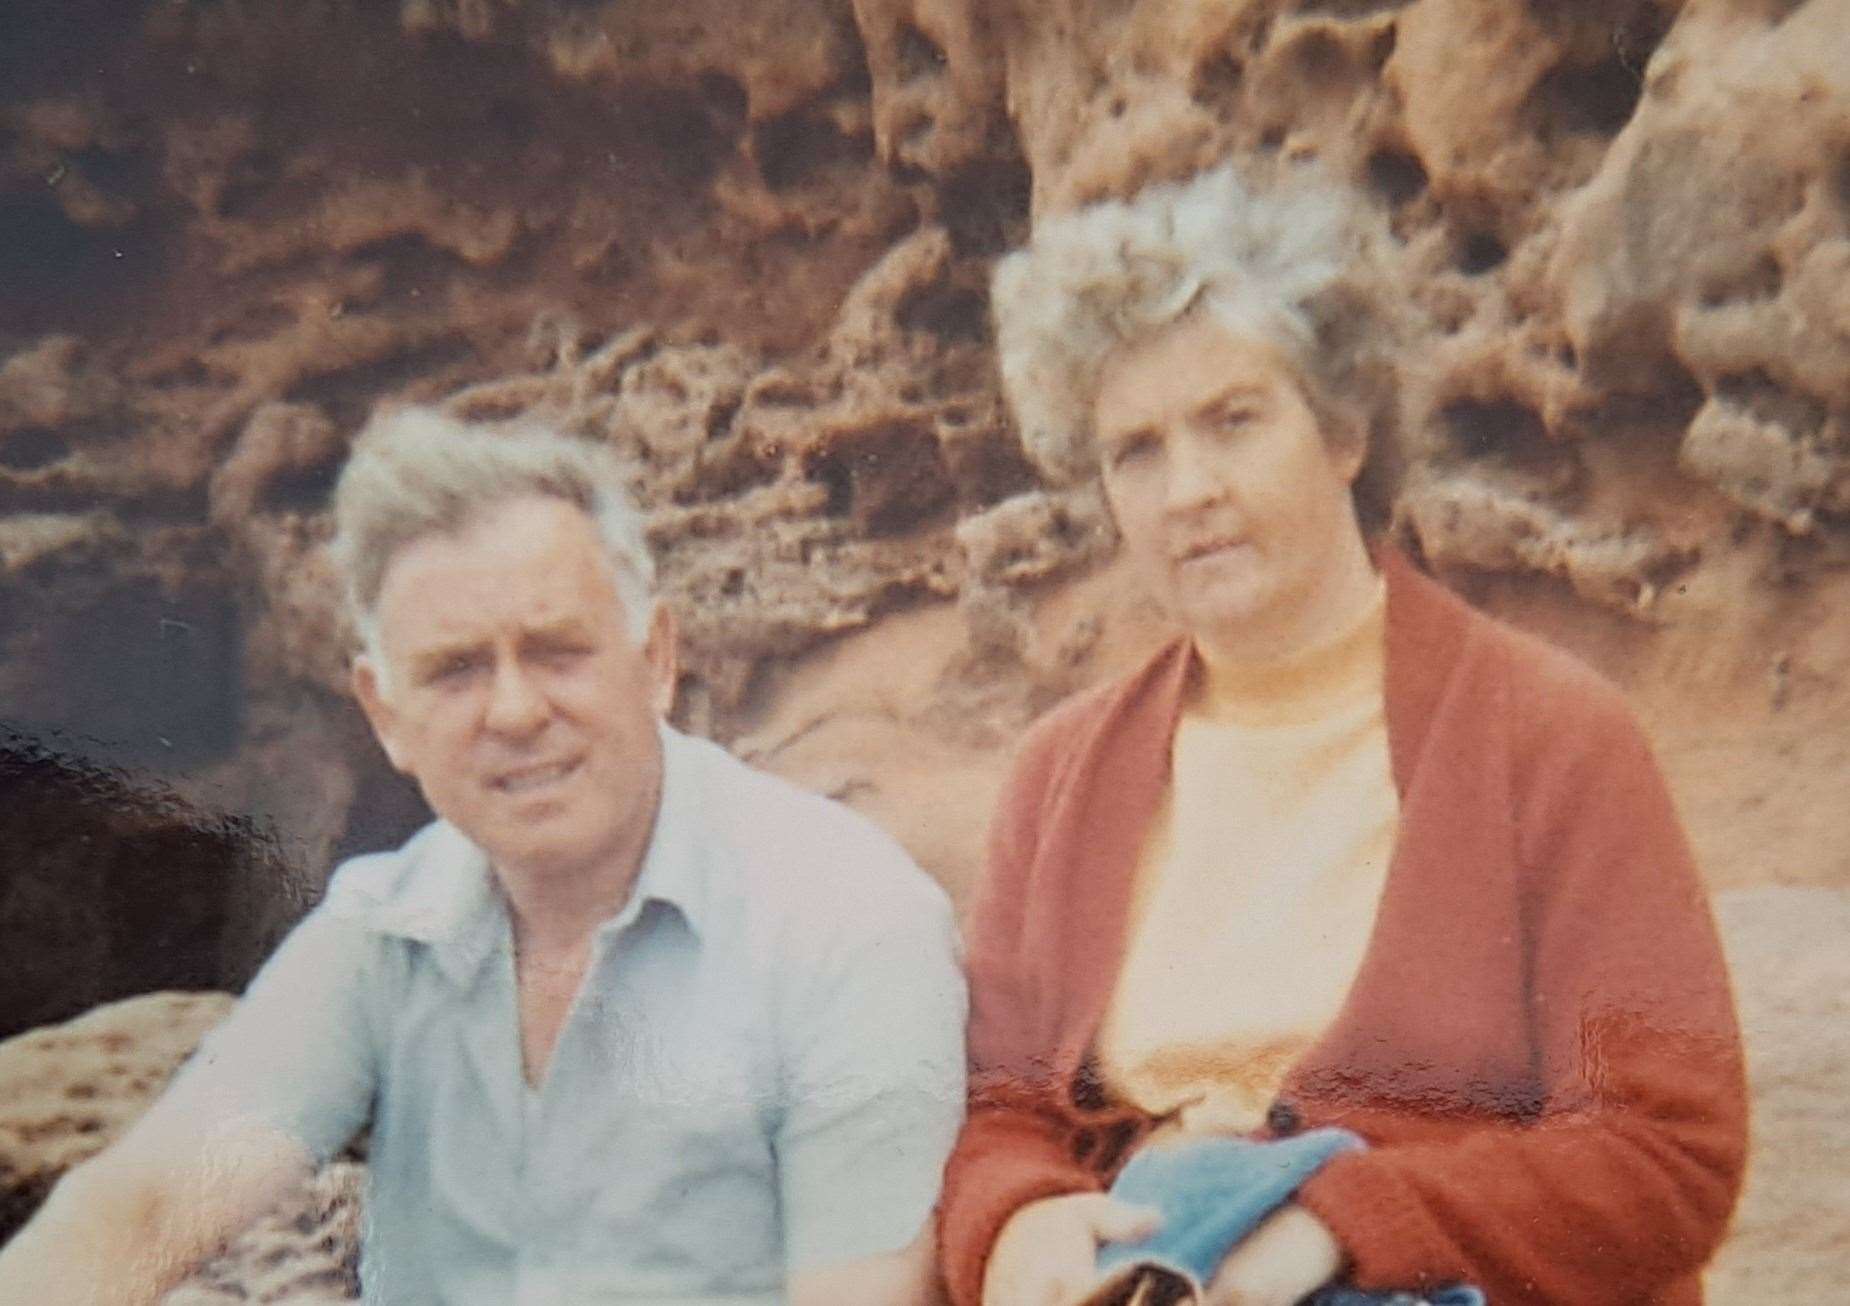 Edward and Maud Sedgwick in the late 1980s. Picture courtesy of the Sedgwick family